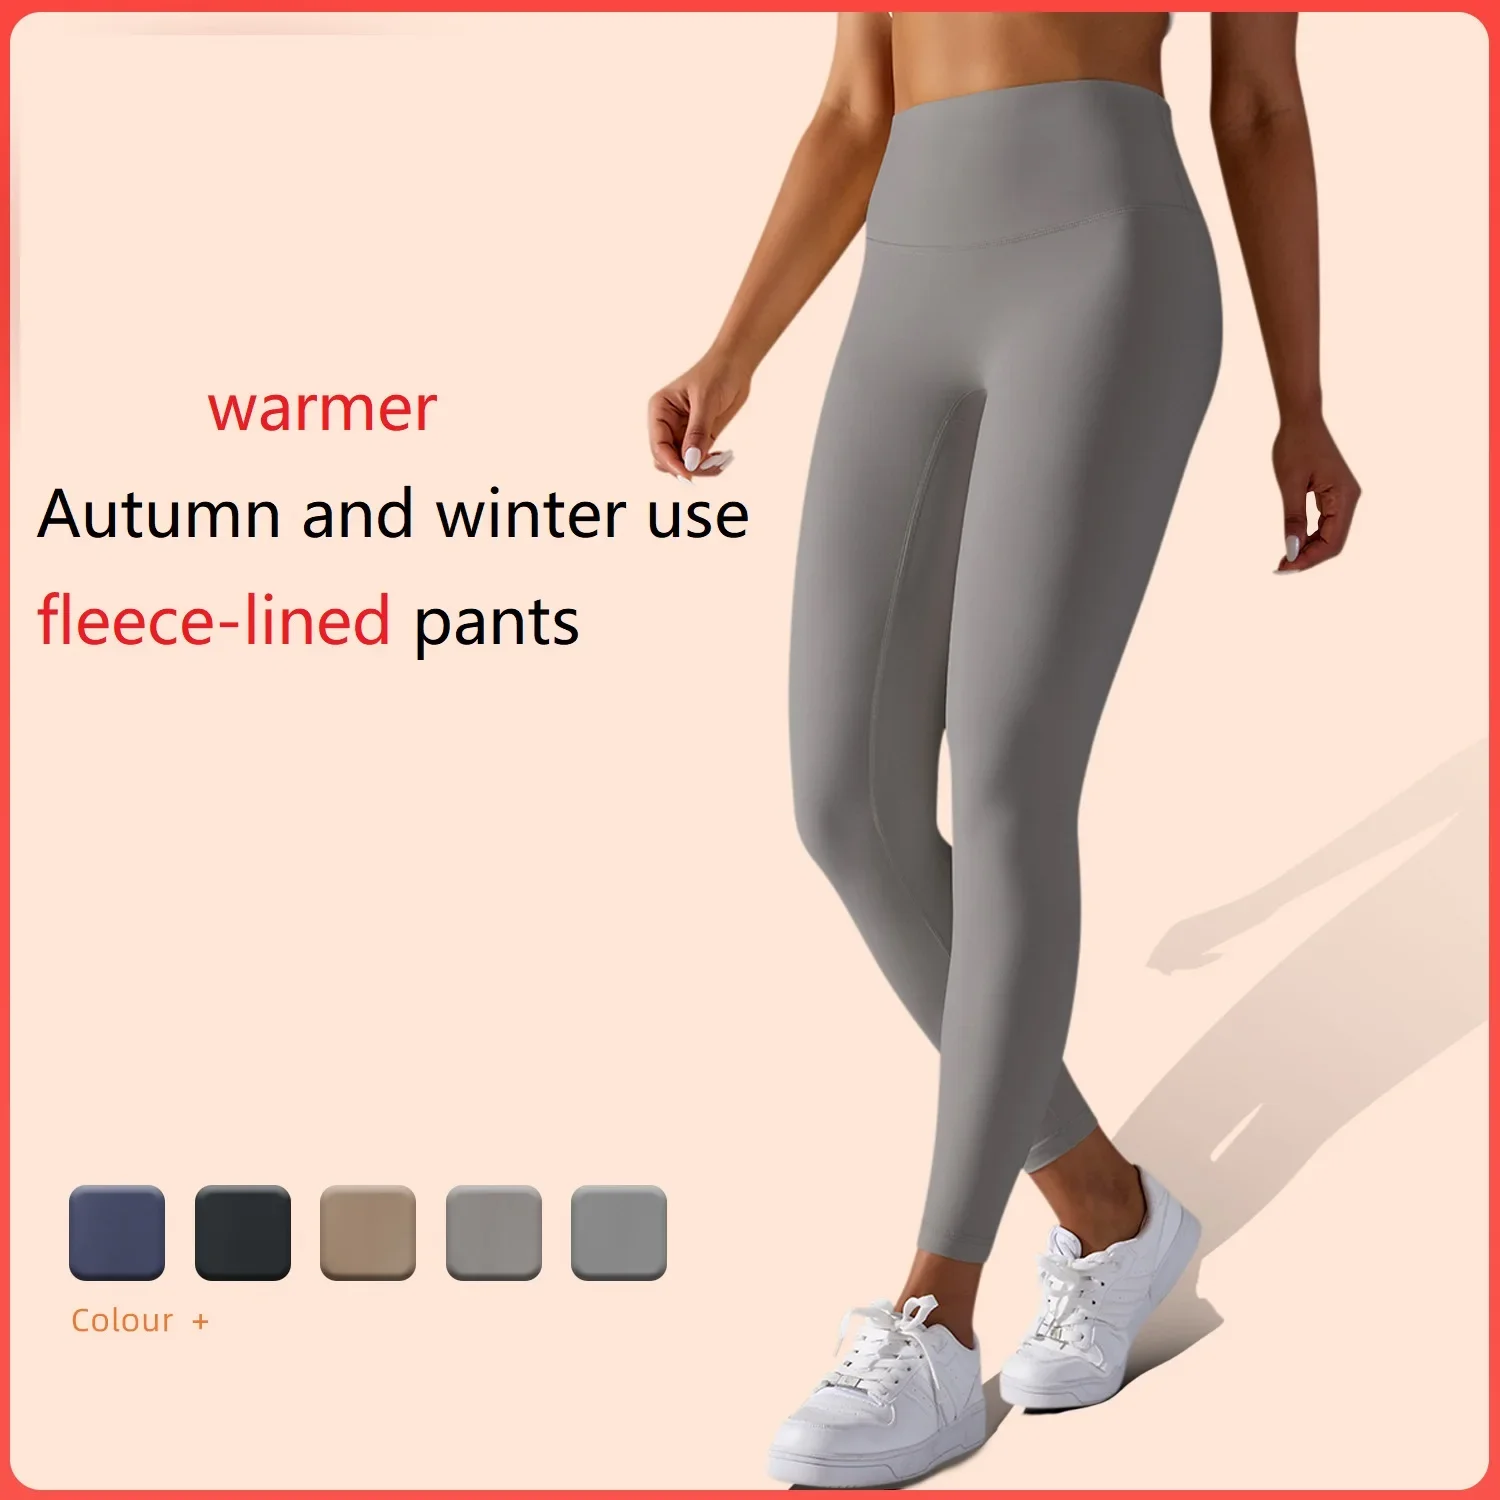 

Women's Pants Leggings Fleece Lined Gym Women's Sports Clothing Solid Full-Length Winter Yoga Tights Workout Fitness Pants